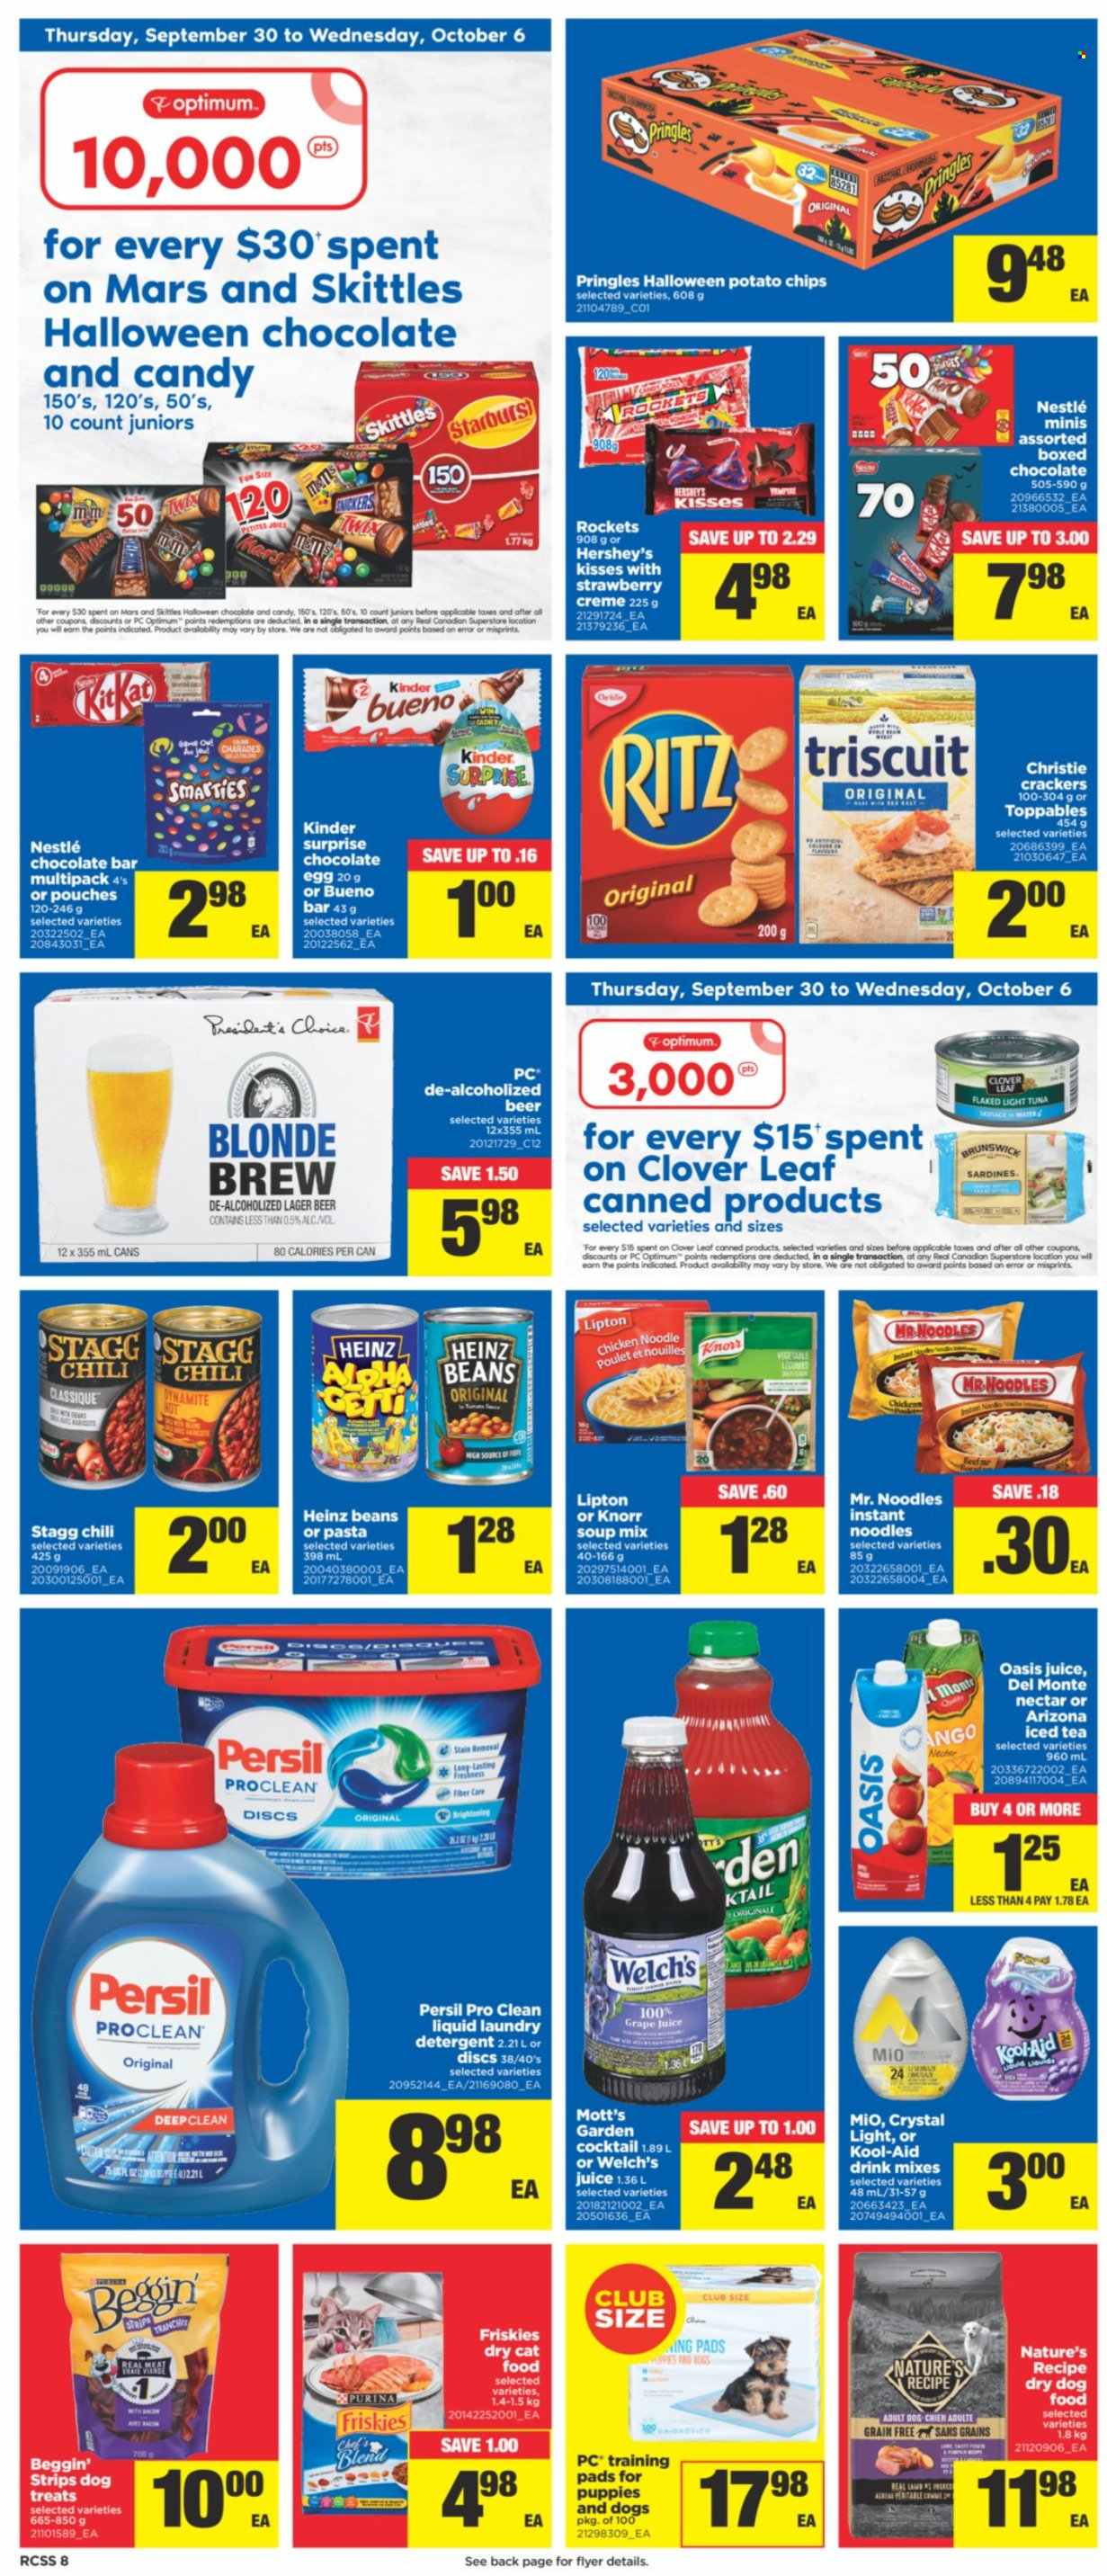 thumbnail - Real Canadian Superstore Flyer - September 30, 2021 - October 06, 2021 - Sales products - beans, Welch's, Mott's, sardines, soup mix, soup, instant noodles, noodles, Clover, eggs, Hershey's, strips, Kinder Surprise, Mars, crackers, Skittles, Starburst, RITZ, chocolate bar, potato chips, Pringles, Heinz, light tuna, juice, ice tea, AriZona, beer, Lager, Persil, laundry detergent, training pads, animal food, cat food, dog food, Purina, Optimum, dry dog food, dry cat food, Beggin', Friskies, Knorr, Nestlé, detergent, chips, Lipton. Page 8.